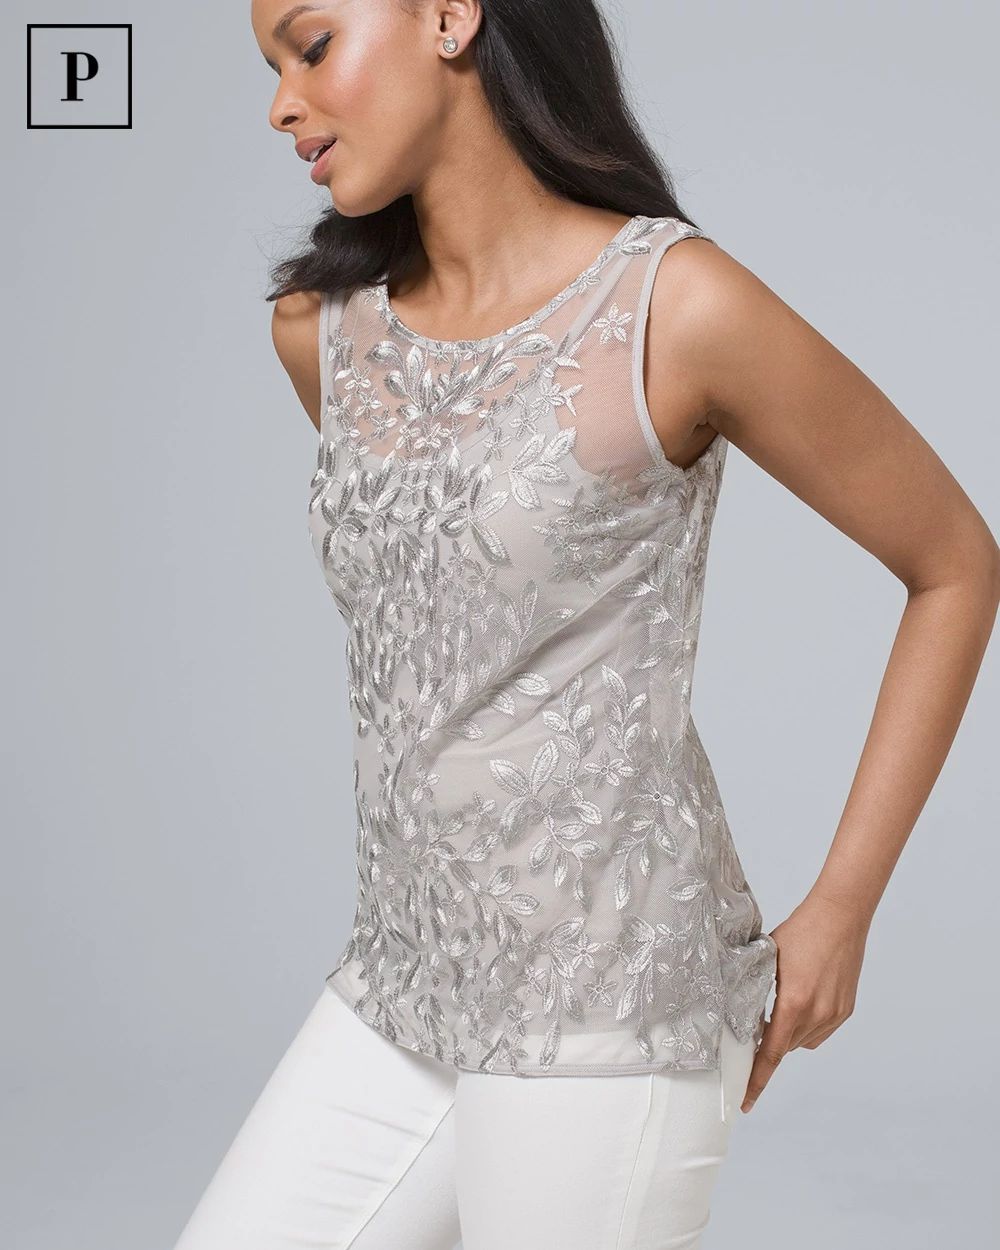 Petite Embroidered Sleeveless Top click to view larger image.